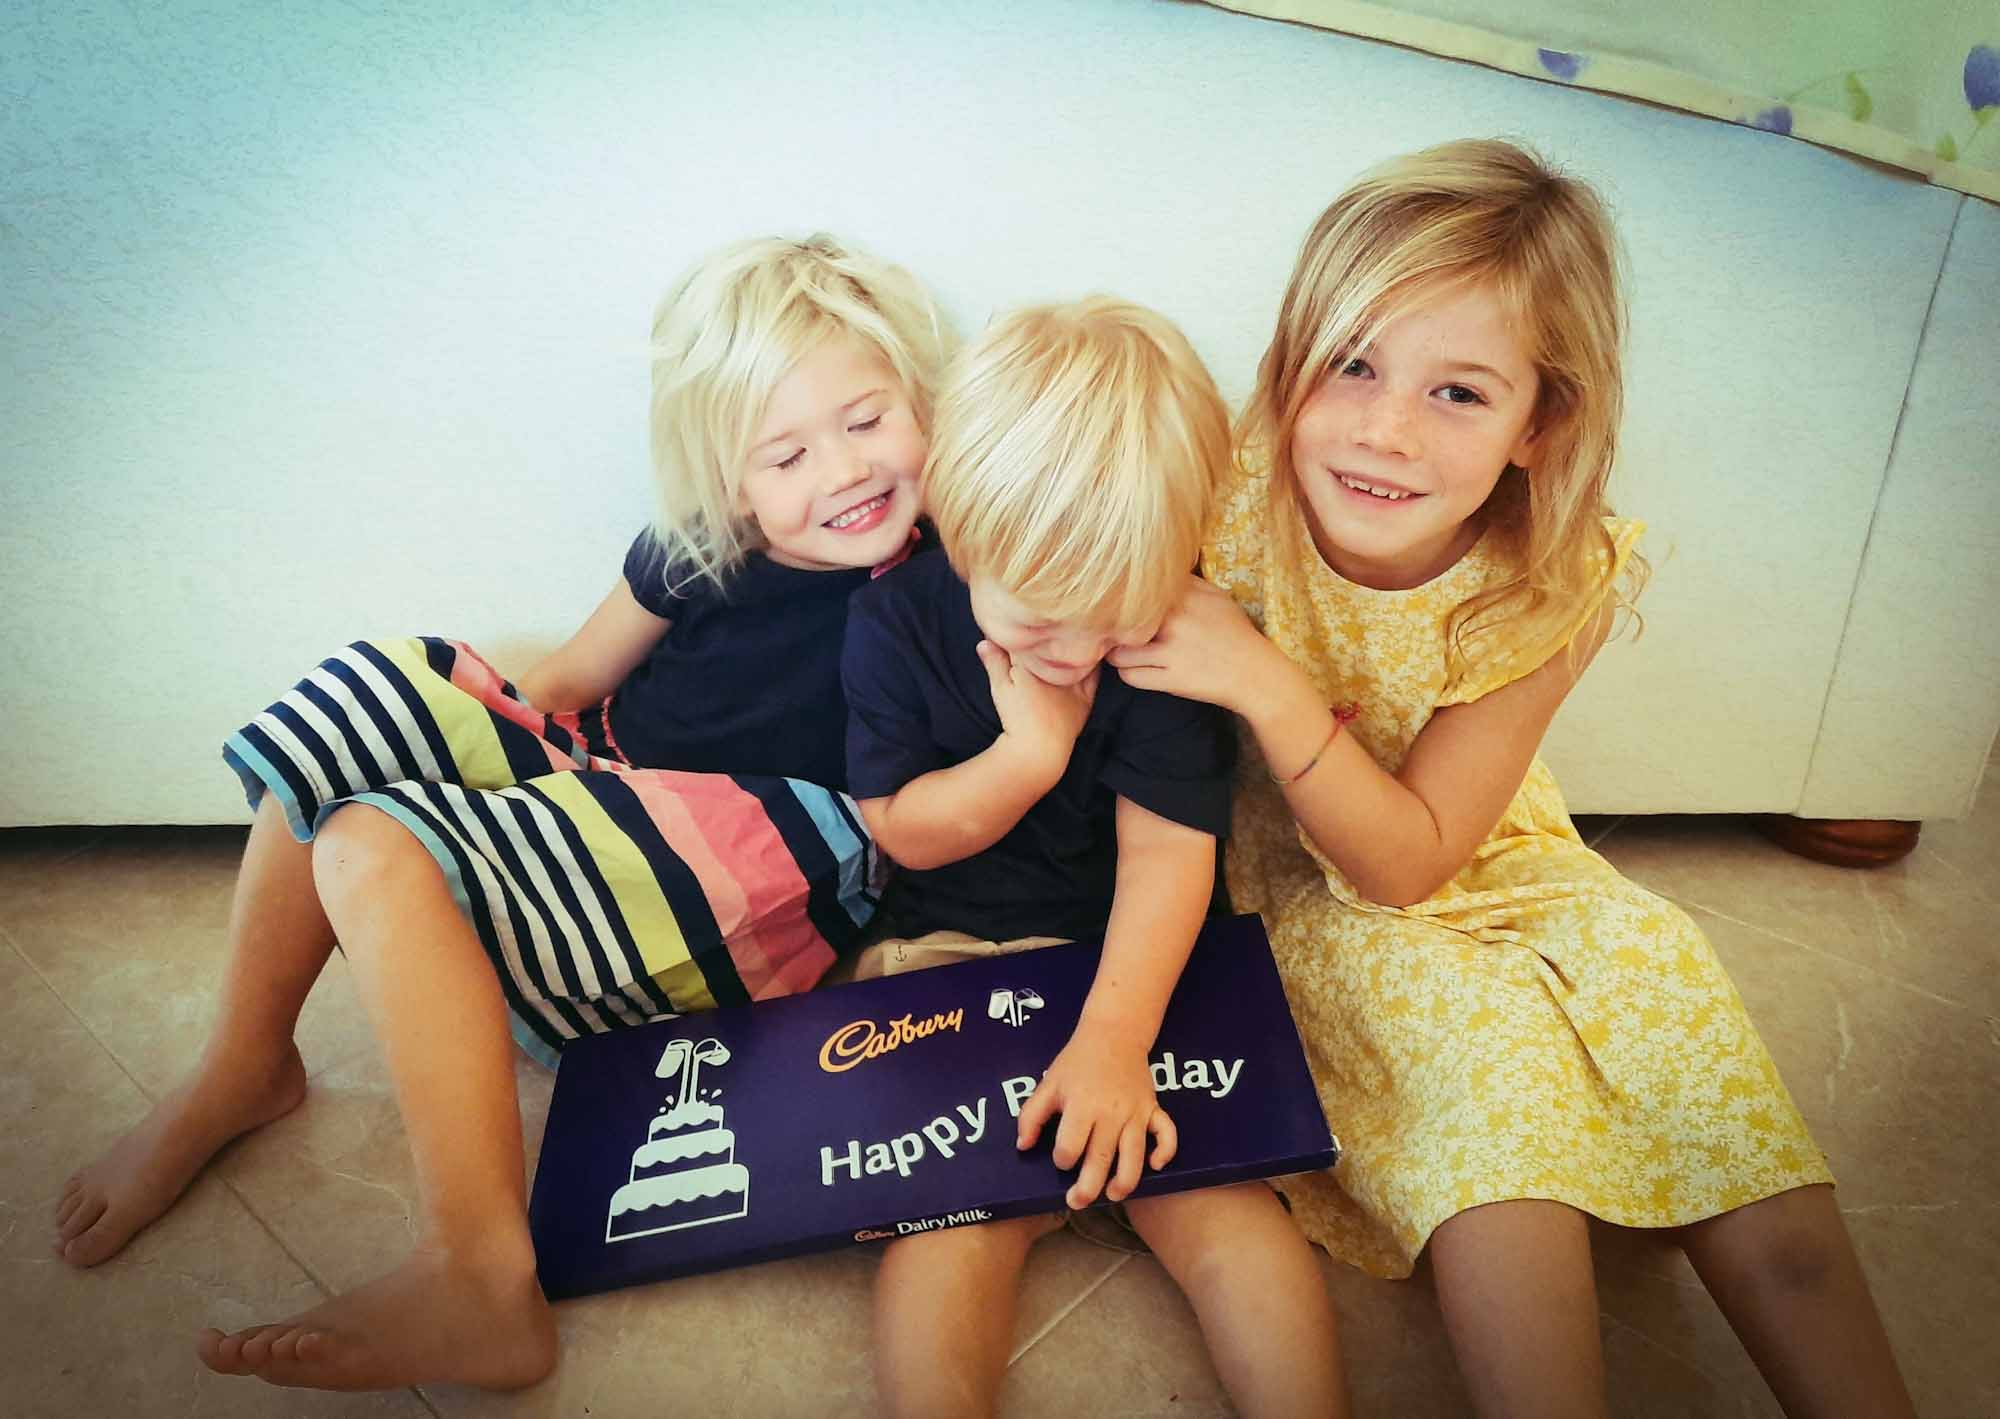 3 small children sat on the floor holding a giant chocolate bar with 'happy birthday' written on it